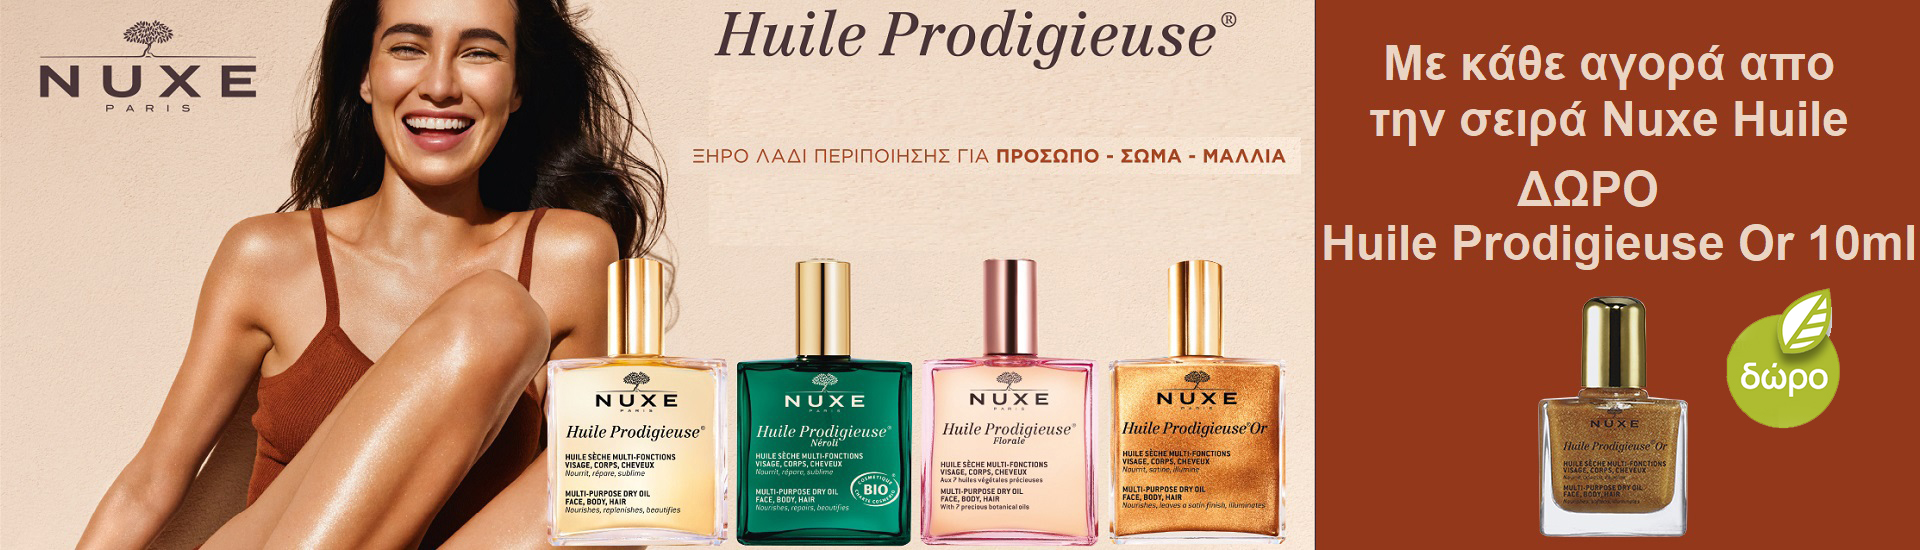 Nuxe Huile